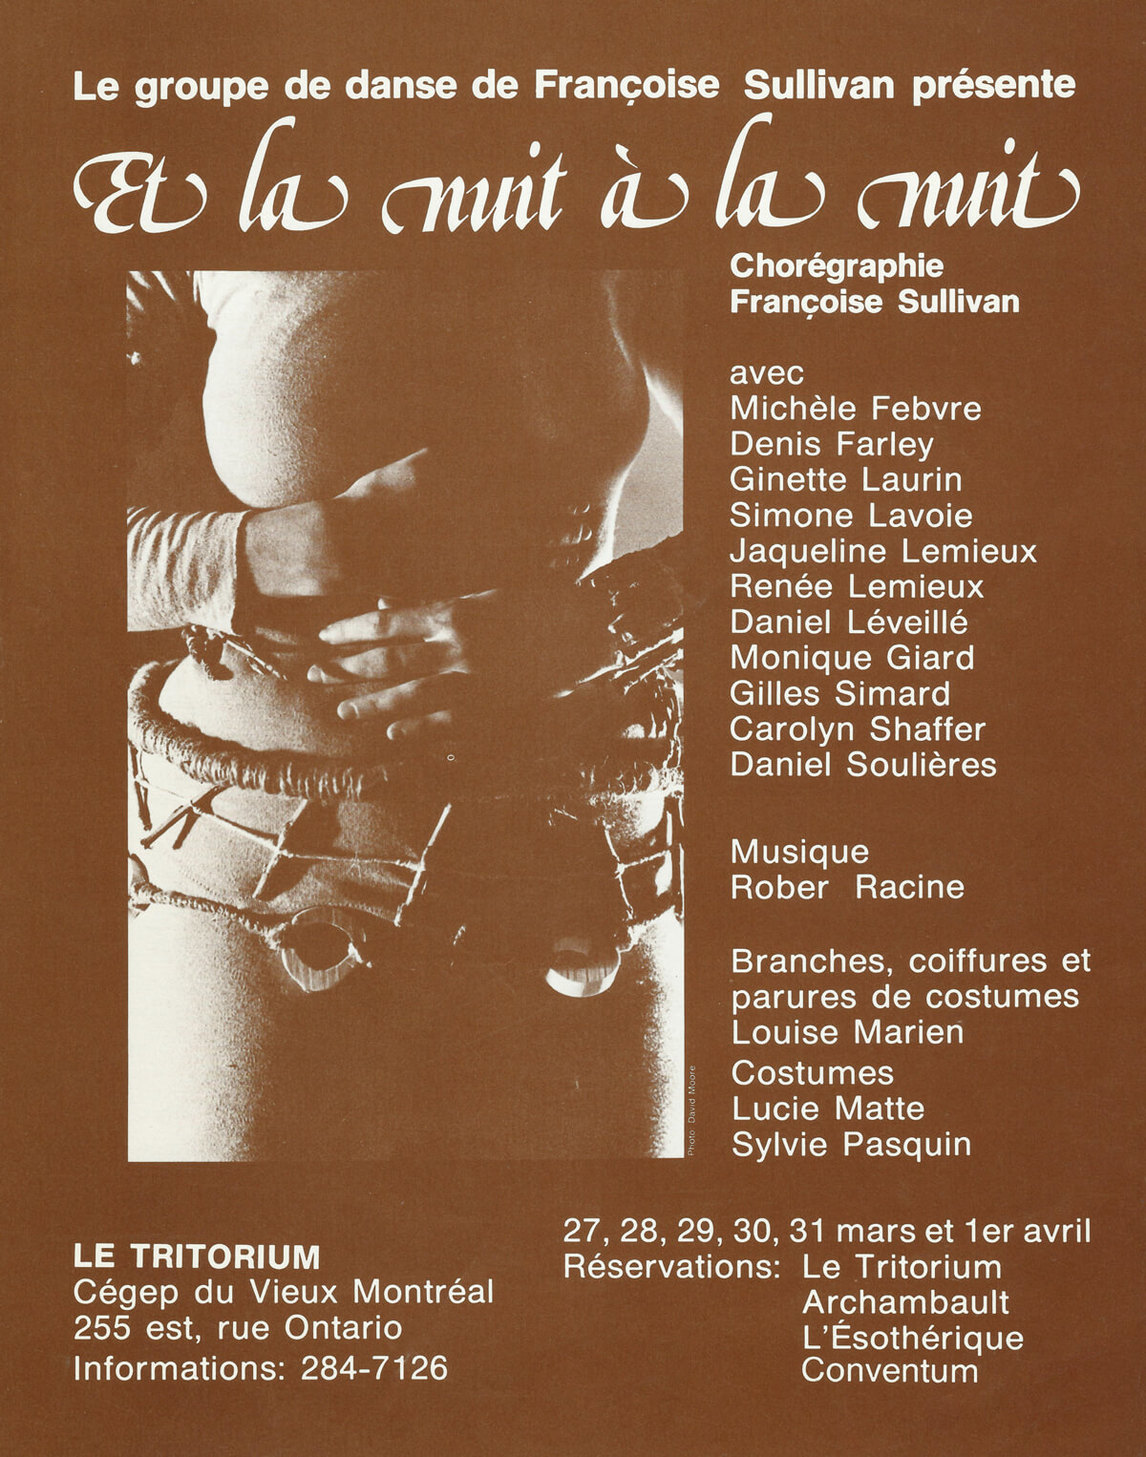 Poster for the performance And the Night to the Night (Et la nuit à la nuit) by Françoise Sullivan’s dance group, 1981.